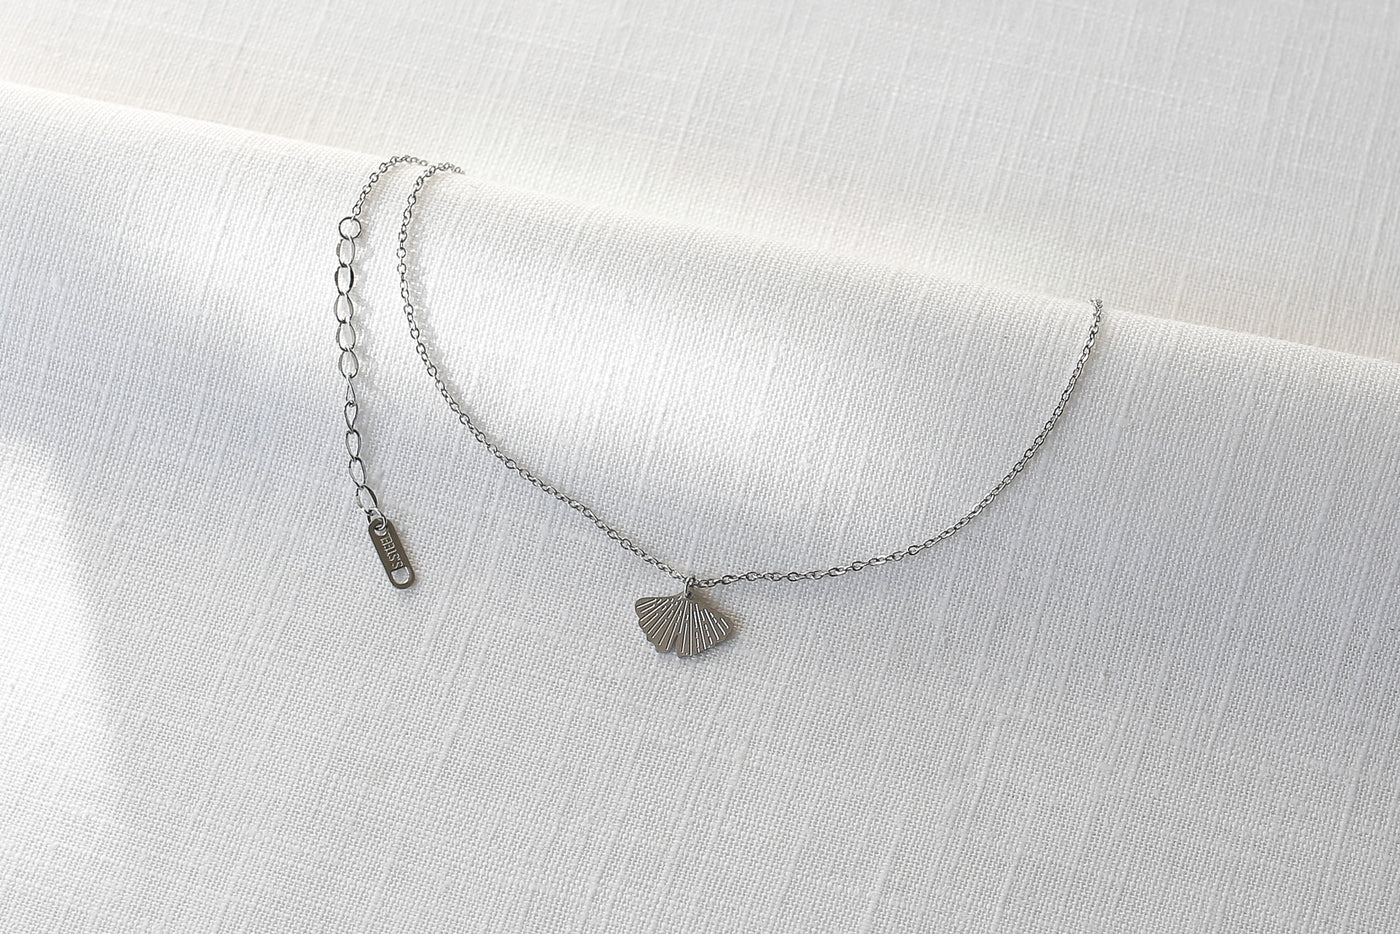 Necklace with ginkgo leaf pendant and Happiness greeting card